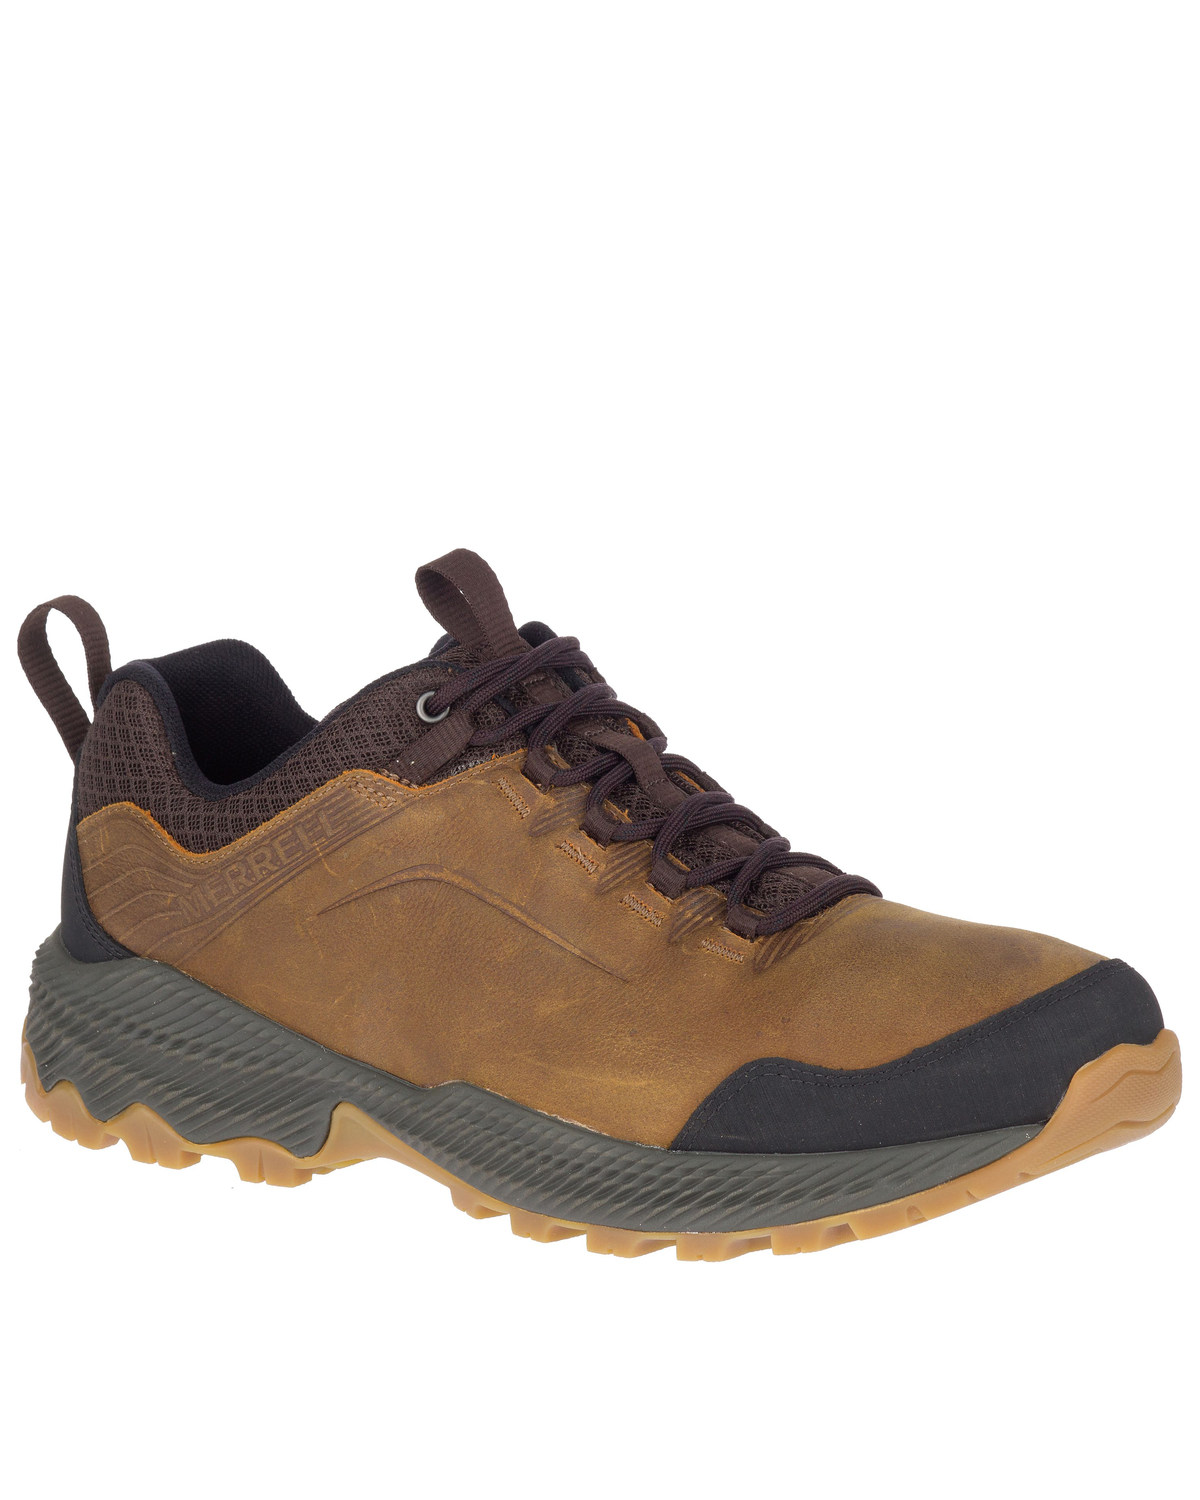 Merrell Men's Forestbound Waterproof Hiking Boots - Soft Toe